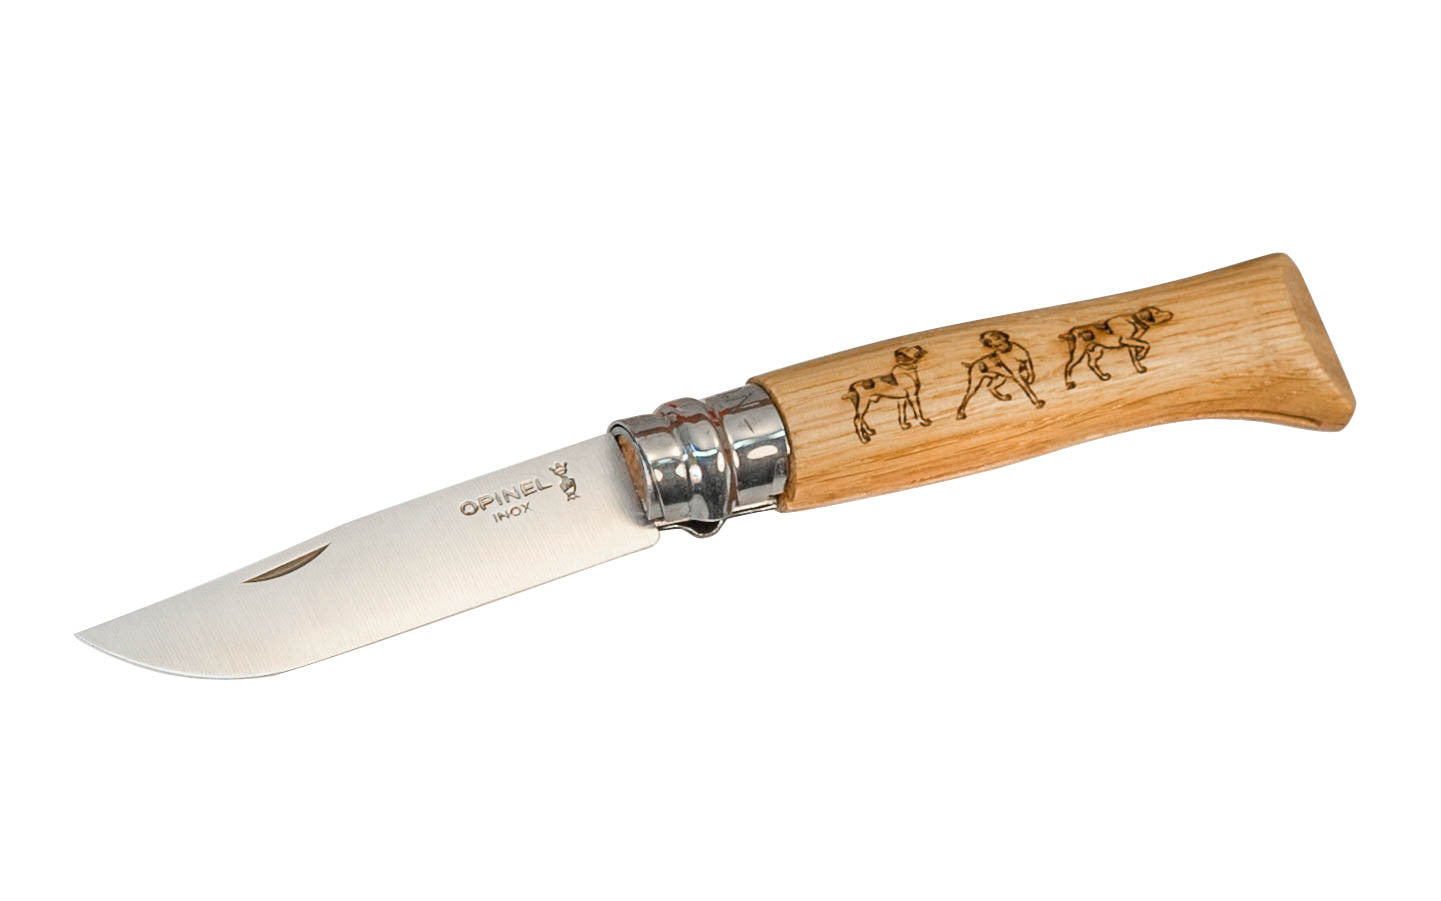 Opinel Stainless Steel Knife ~ Decorated "Dog" Handle ~ Made in France ~ 3-1/4" long foldable stainless blade with stainless locking collar ~ Beechwood handle with specially engraved dog motif ~ Great for dog lovers!